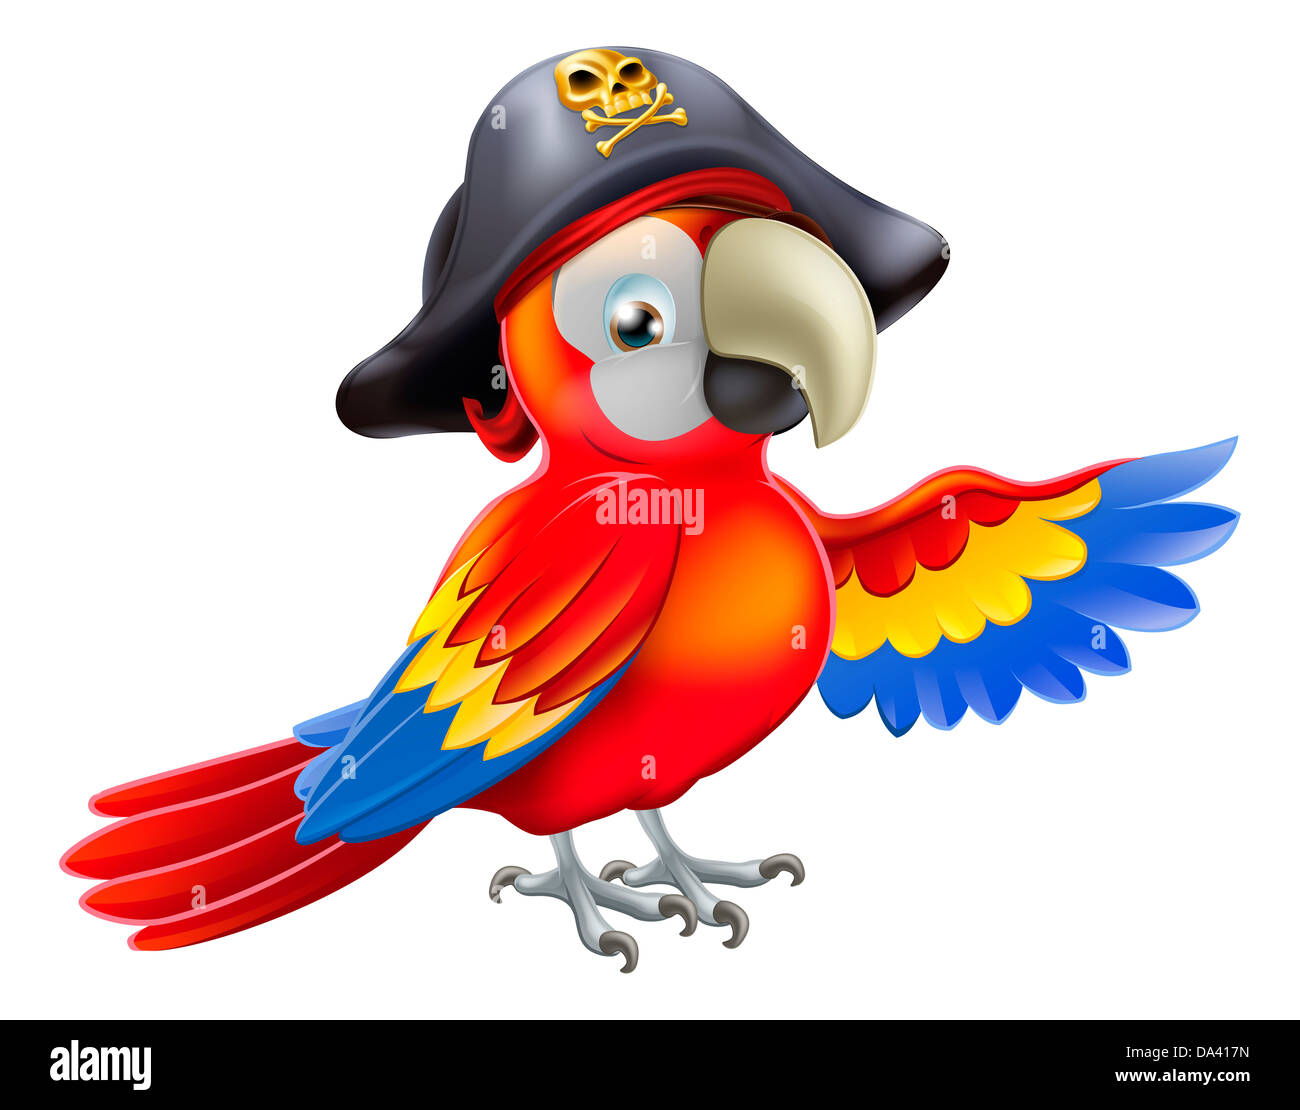 A cartoon pirate parrot character with an eye patch and tricorn hat with skull and cross bones pointing with its wing Stock Photo